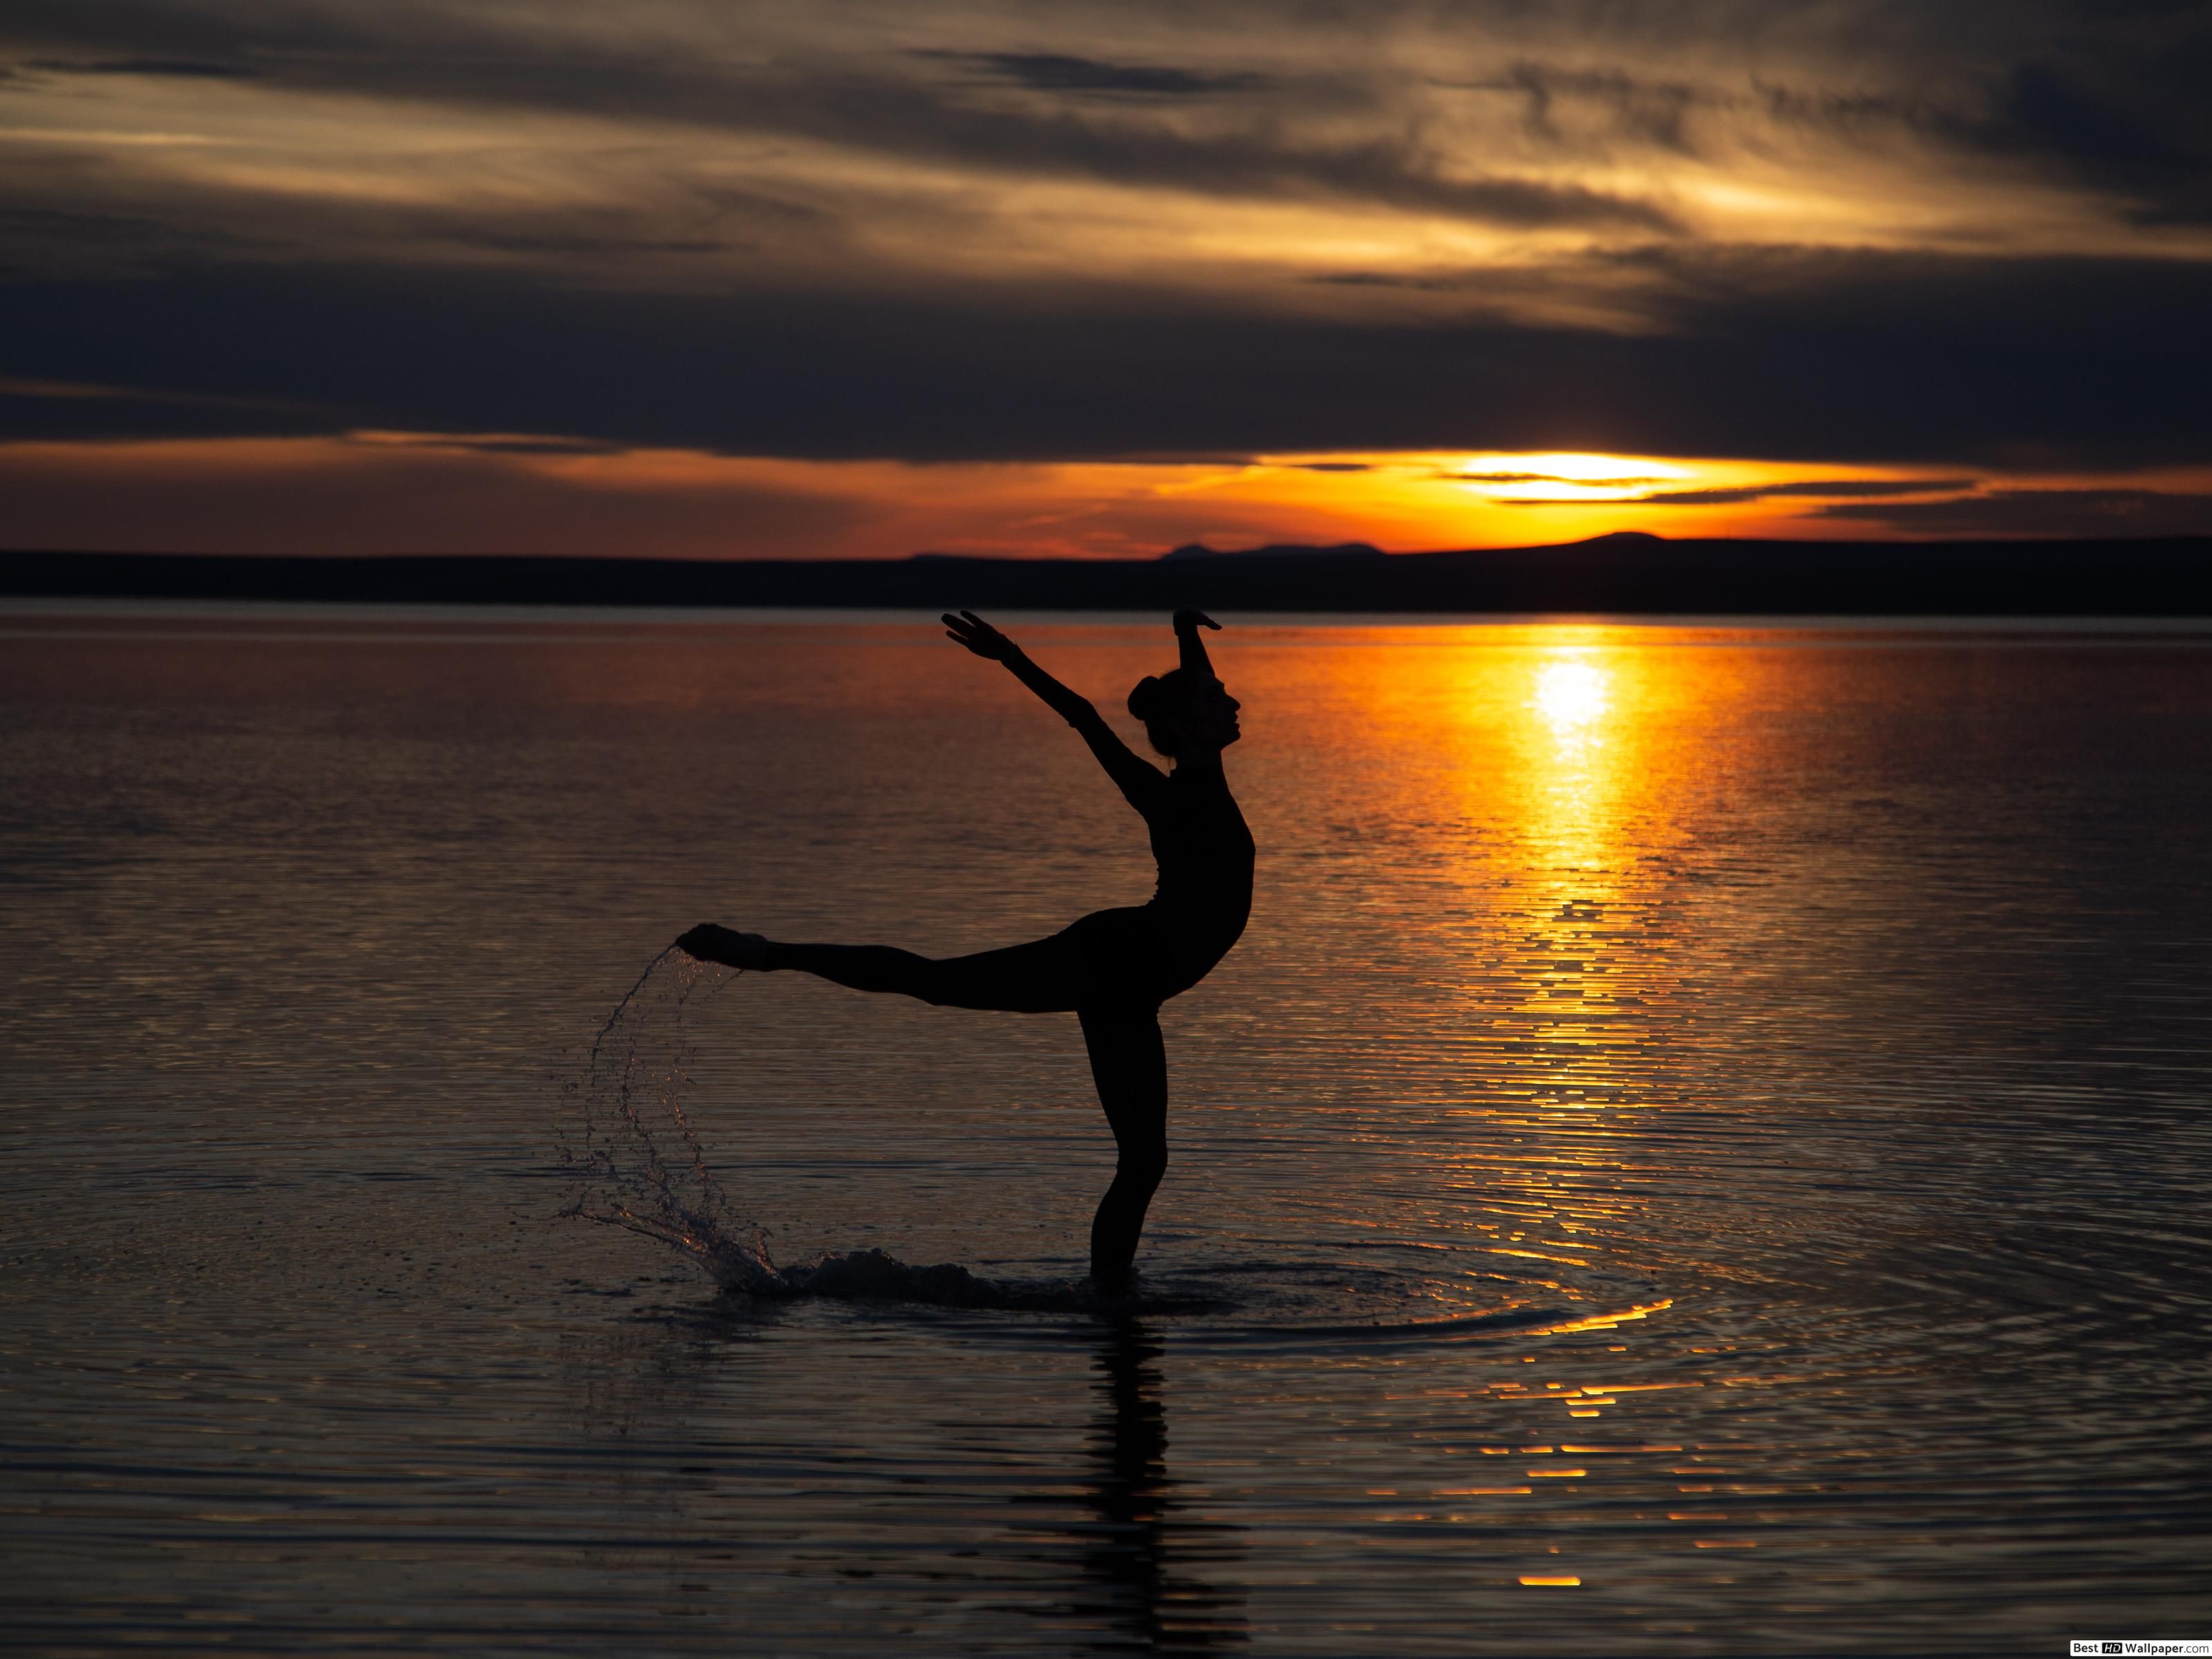 Dancing in the lake by the sunset HD wallpaper download